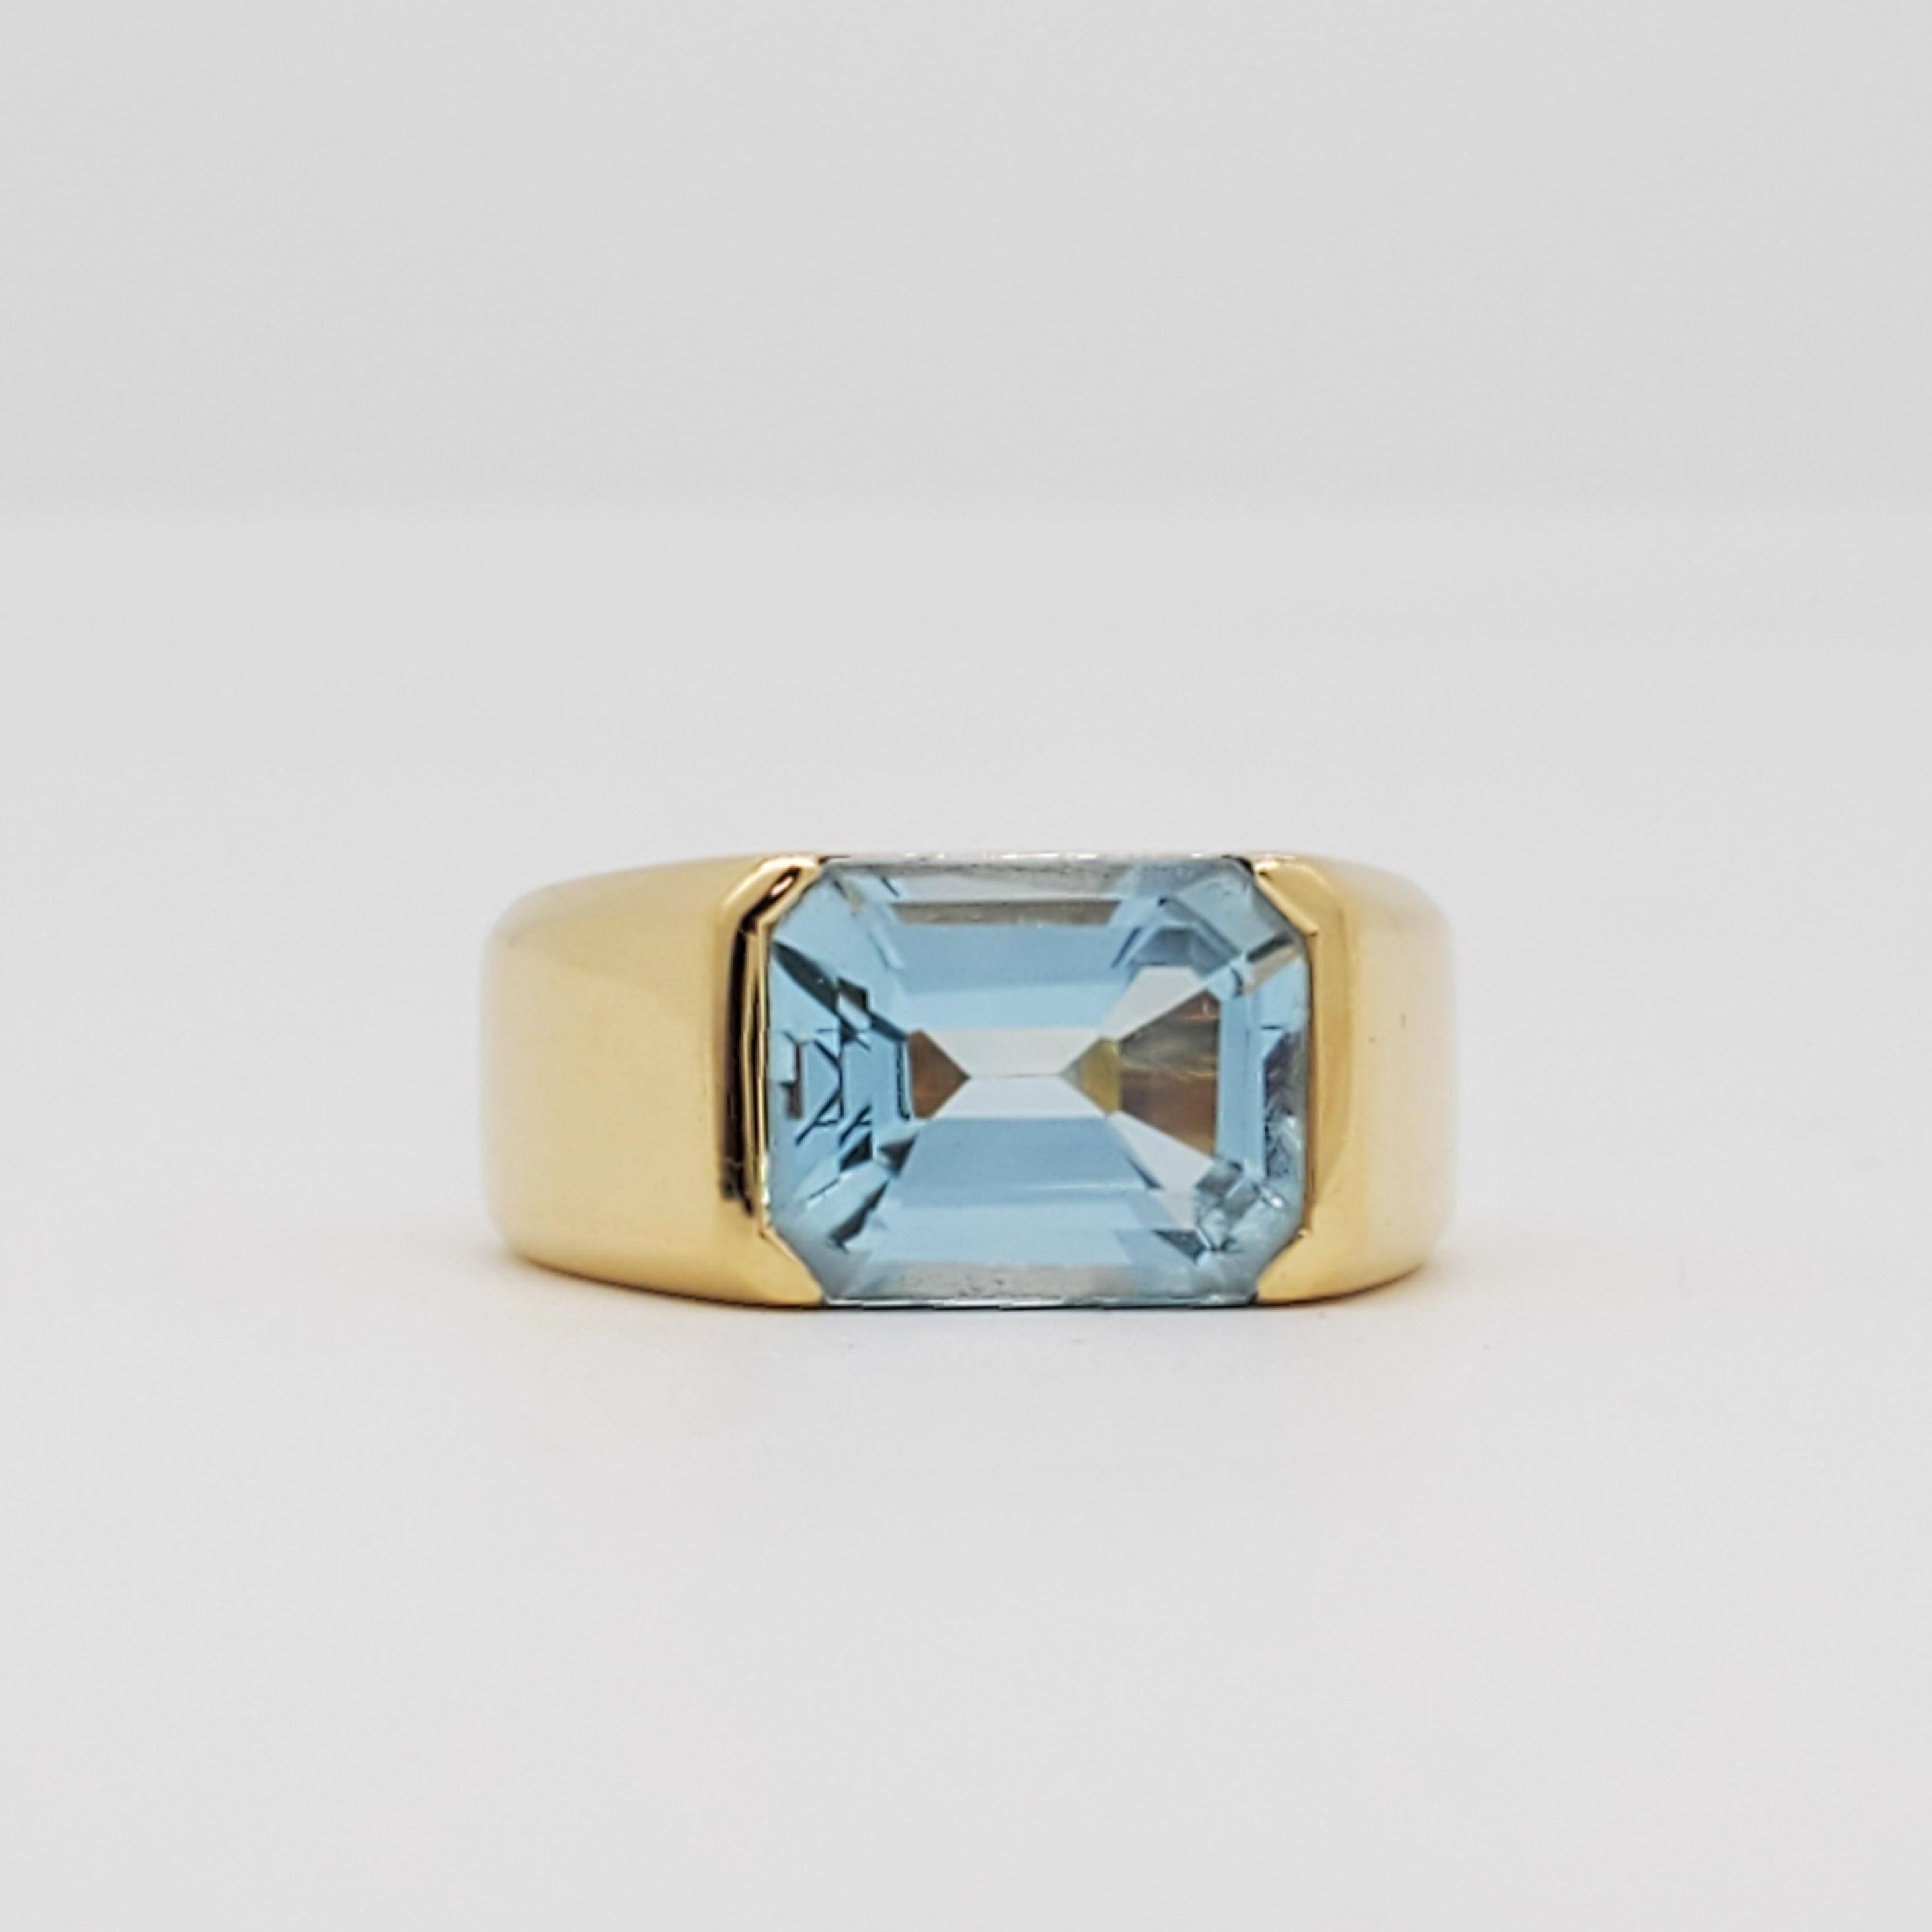 Gorgeous 3.50 ct. blue topaz emerald cut ring handmade in 18k yellow gold.  Ring size 4.5.